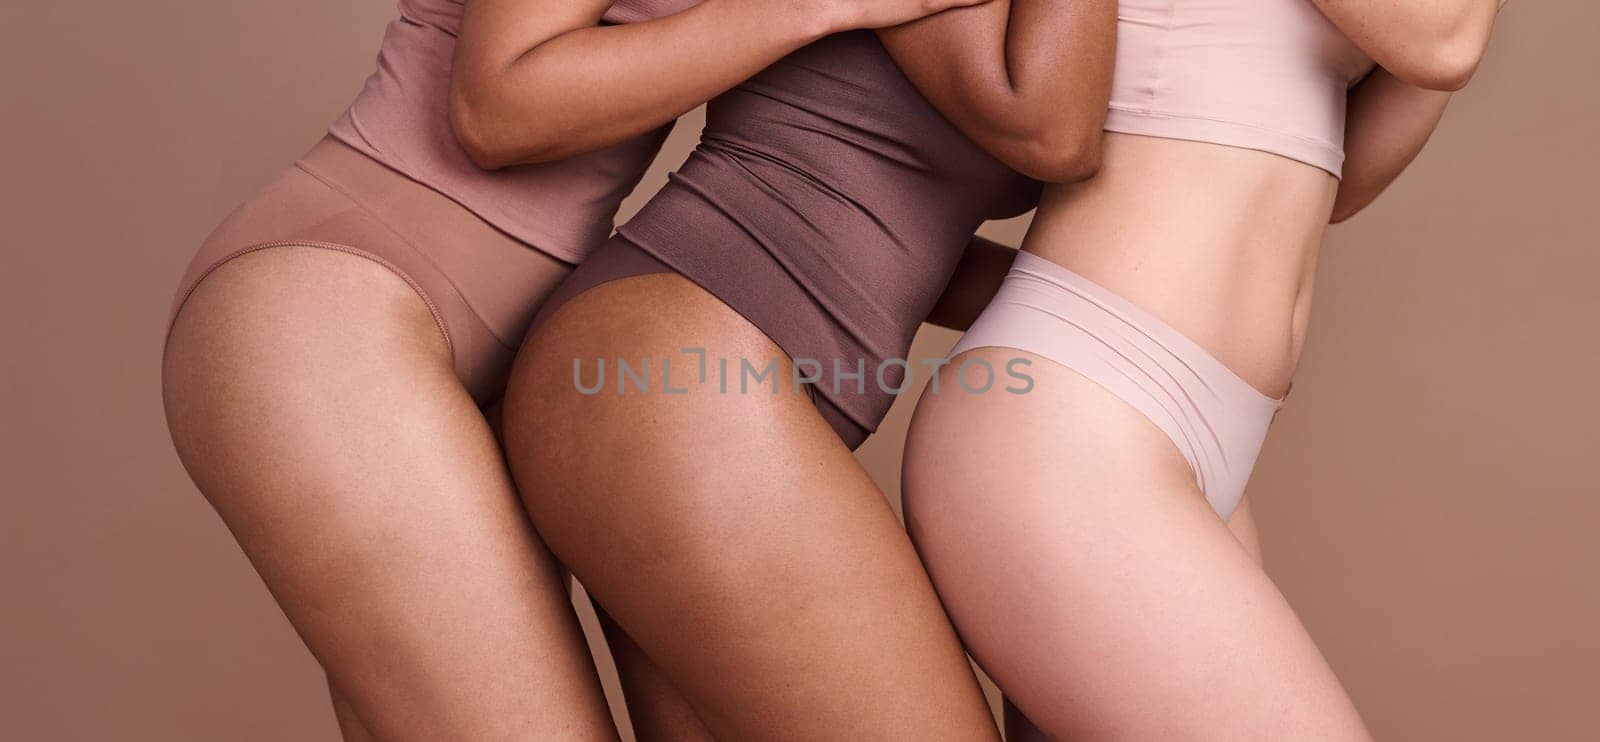 Legs, skincare and diversity of body positive women, natural beauty and wellness on studio. Group, models and thighs together in underwear for laser cosmetics, healthy glow or aesthetics of self care by YuriArcurs